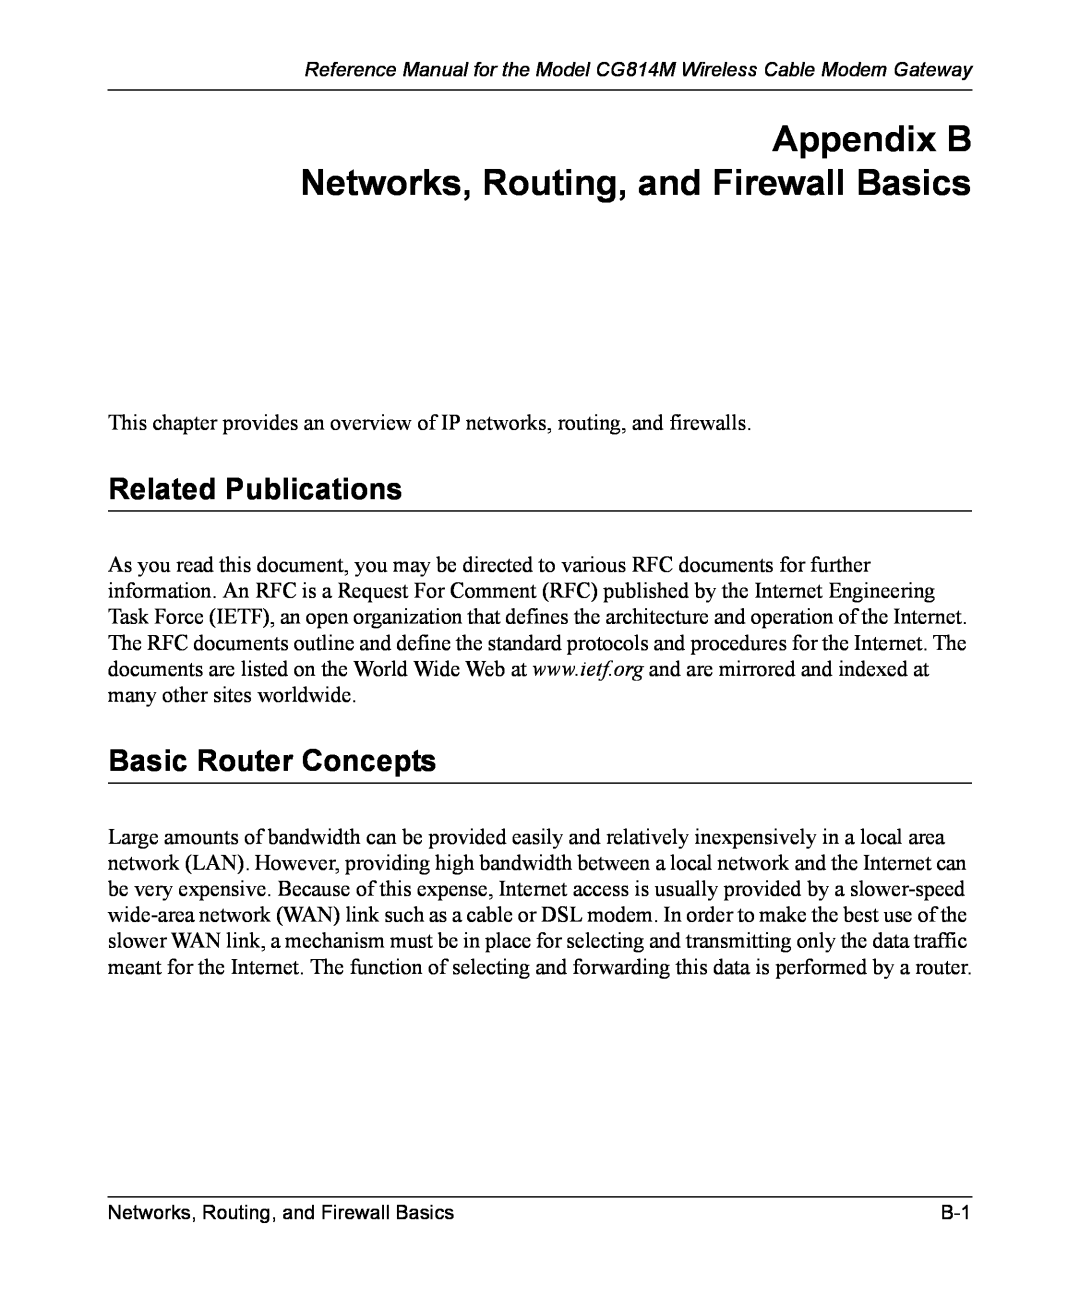 NETGEAR CG814M manual Appendix B Networks, Routing, and Firewall Basics, Related Publications, Basic Router Concepts 